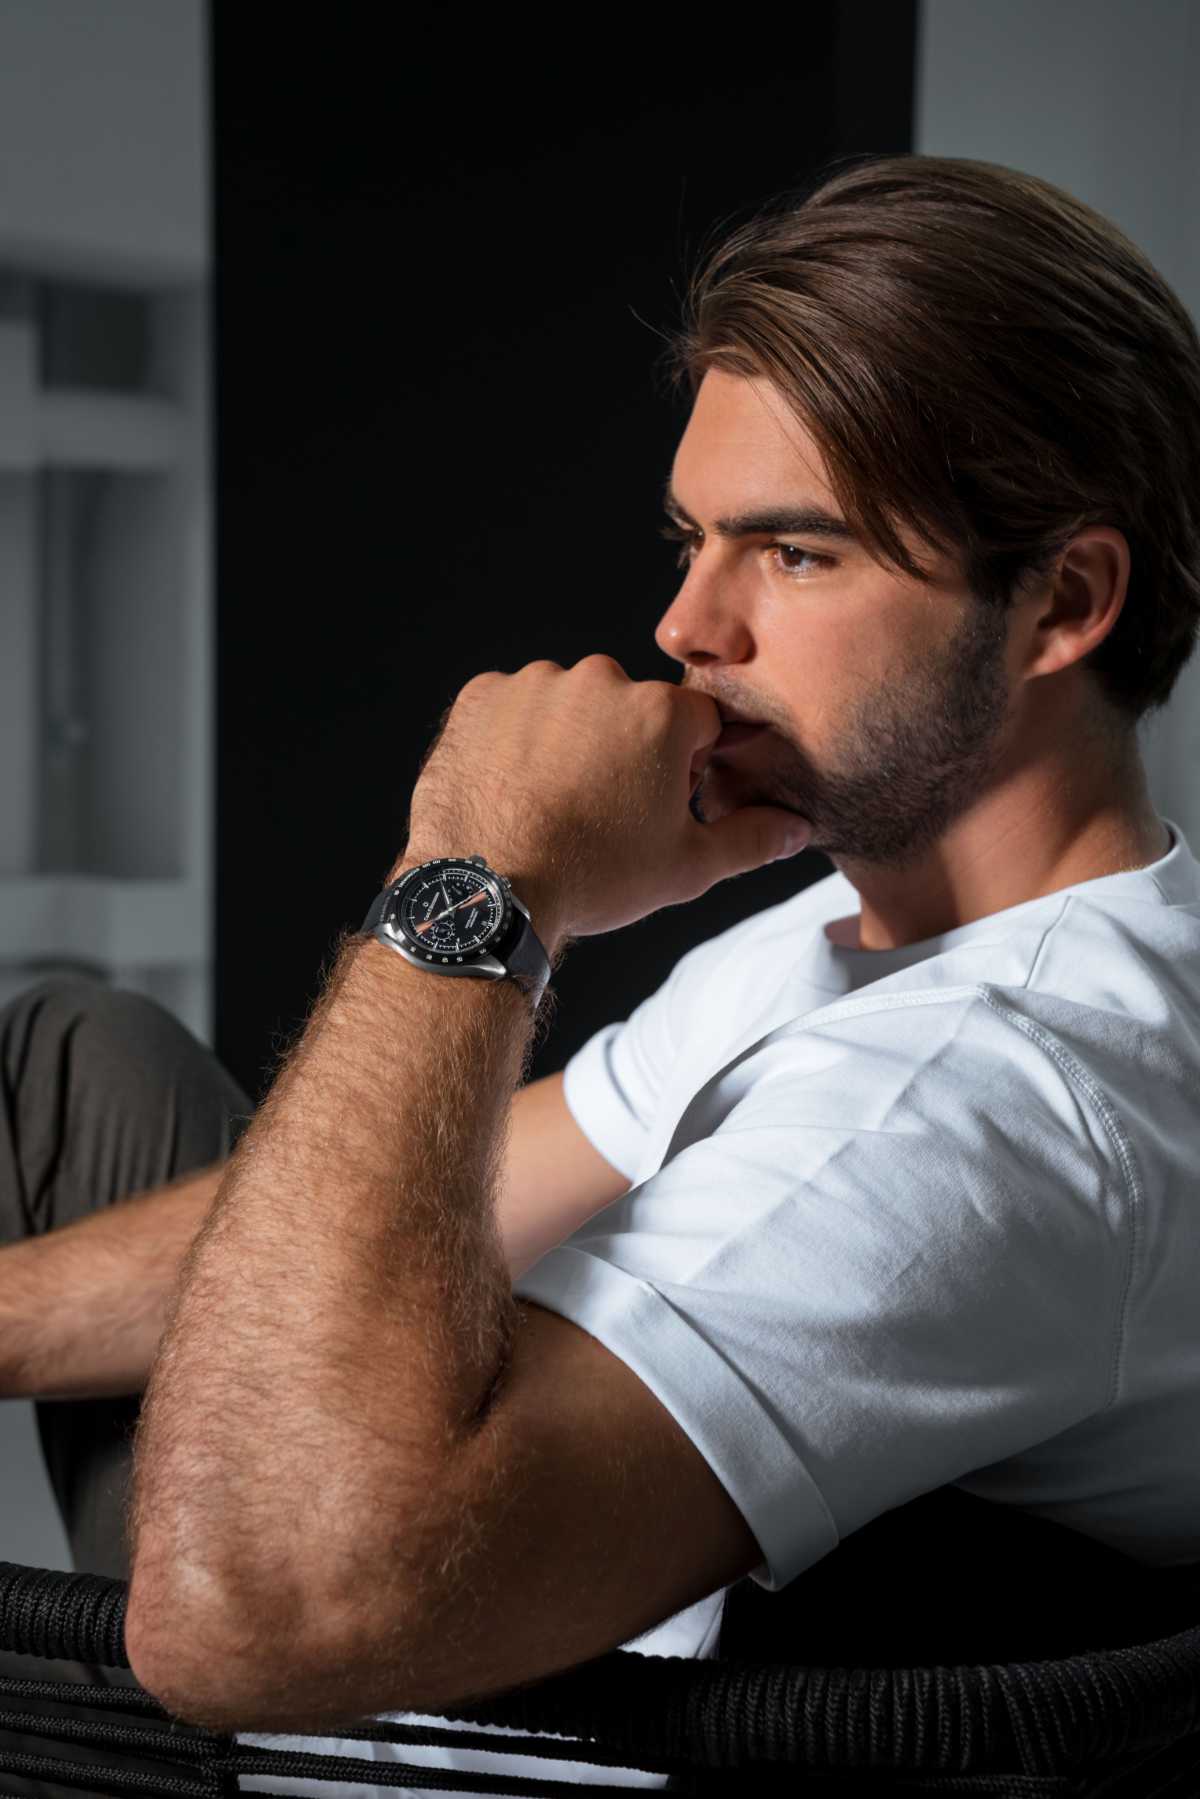 The Perfect Watch To Inspire The Ideal Work/Life Balance: The Manero Central Counter